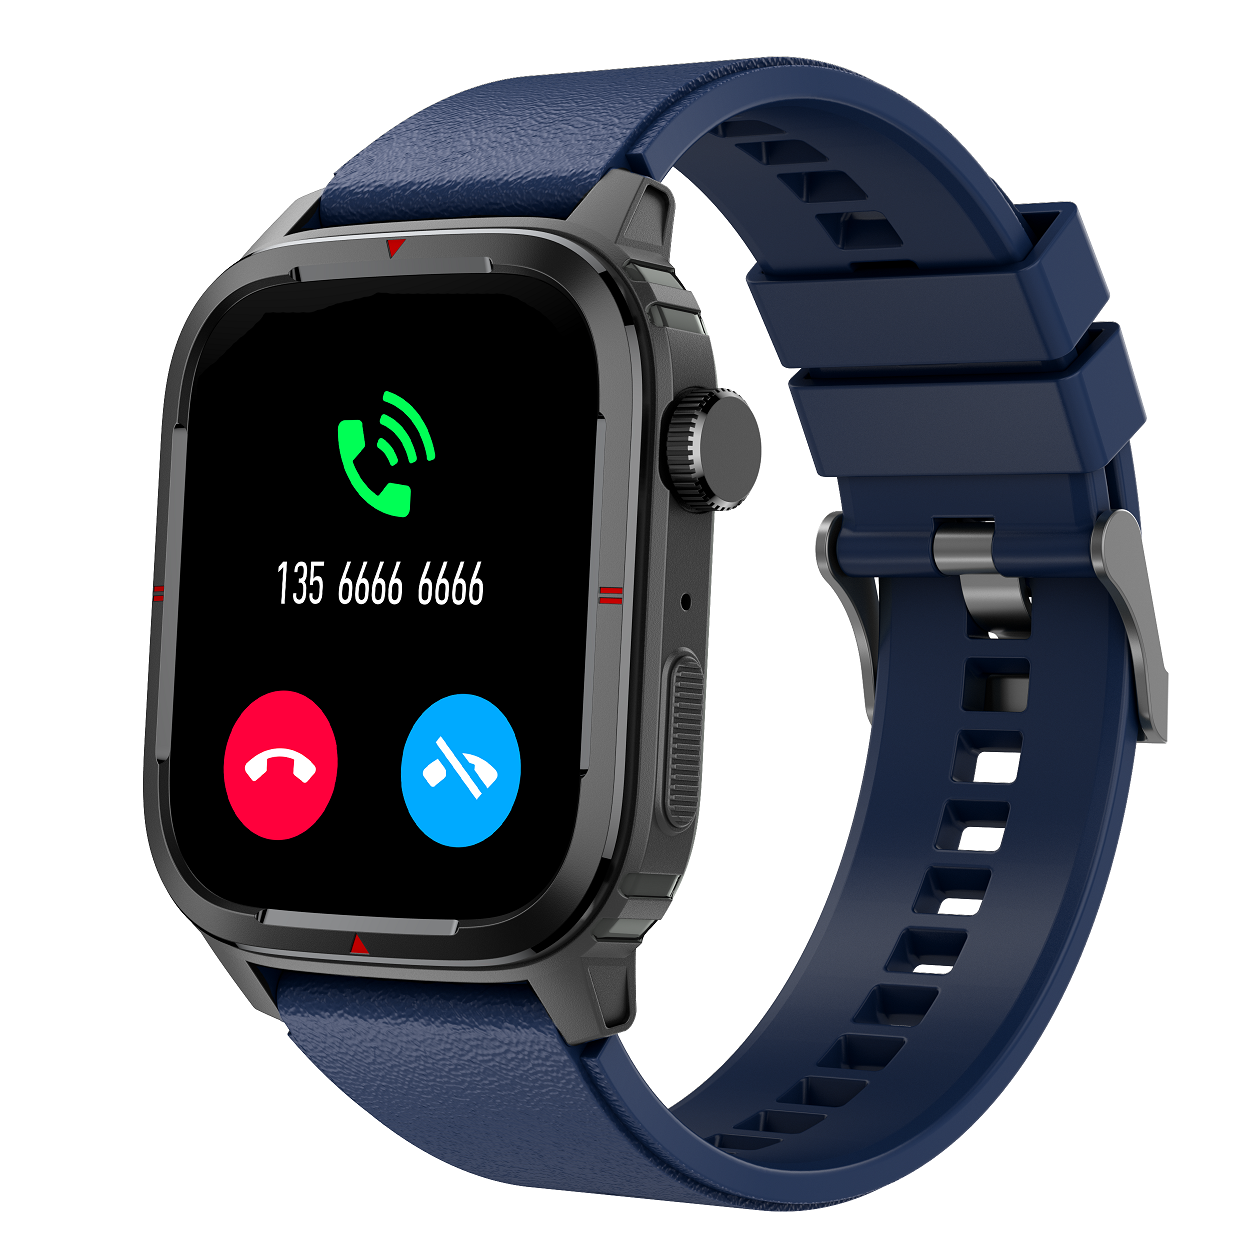 Valdus Q25 Sport Smartwatch: Stay connected with Bluetooth calling and sleek design. | Blue Chilli Electronics.